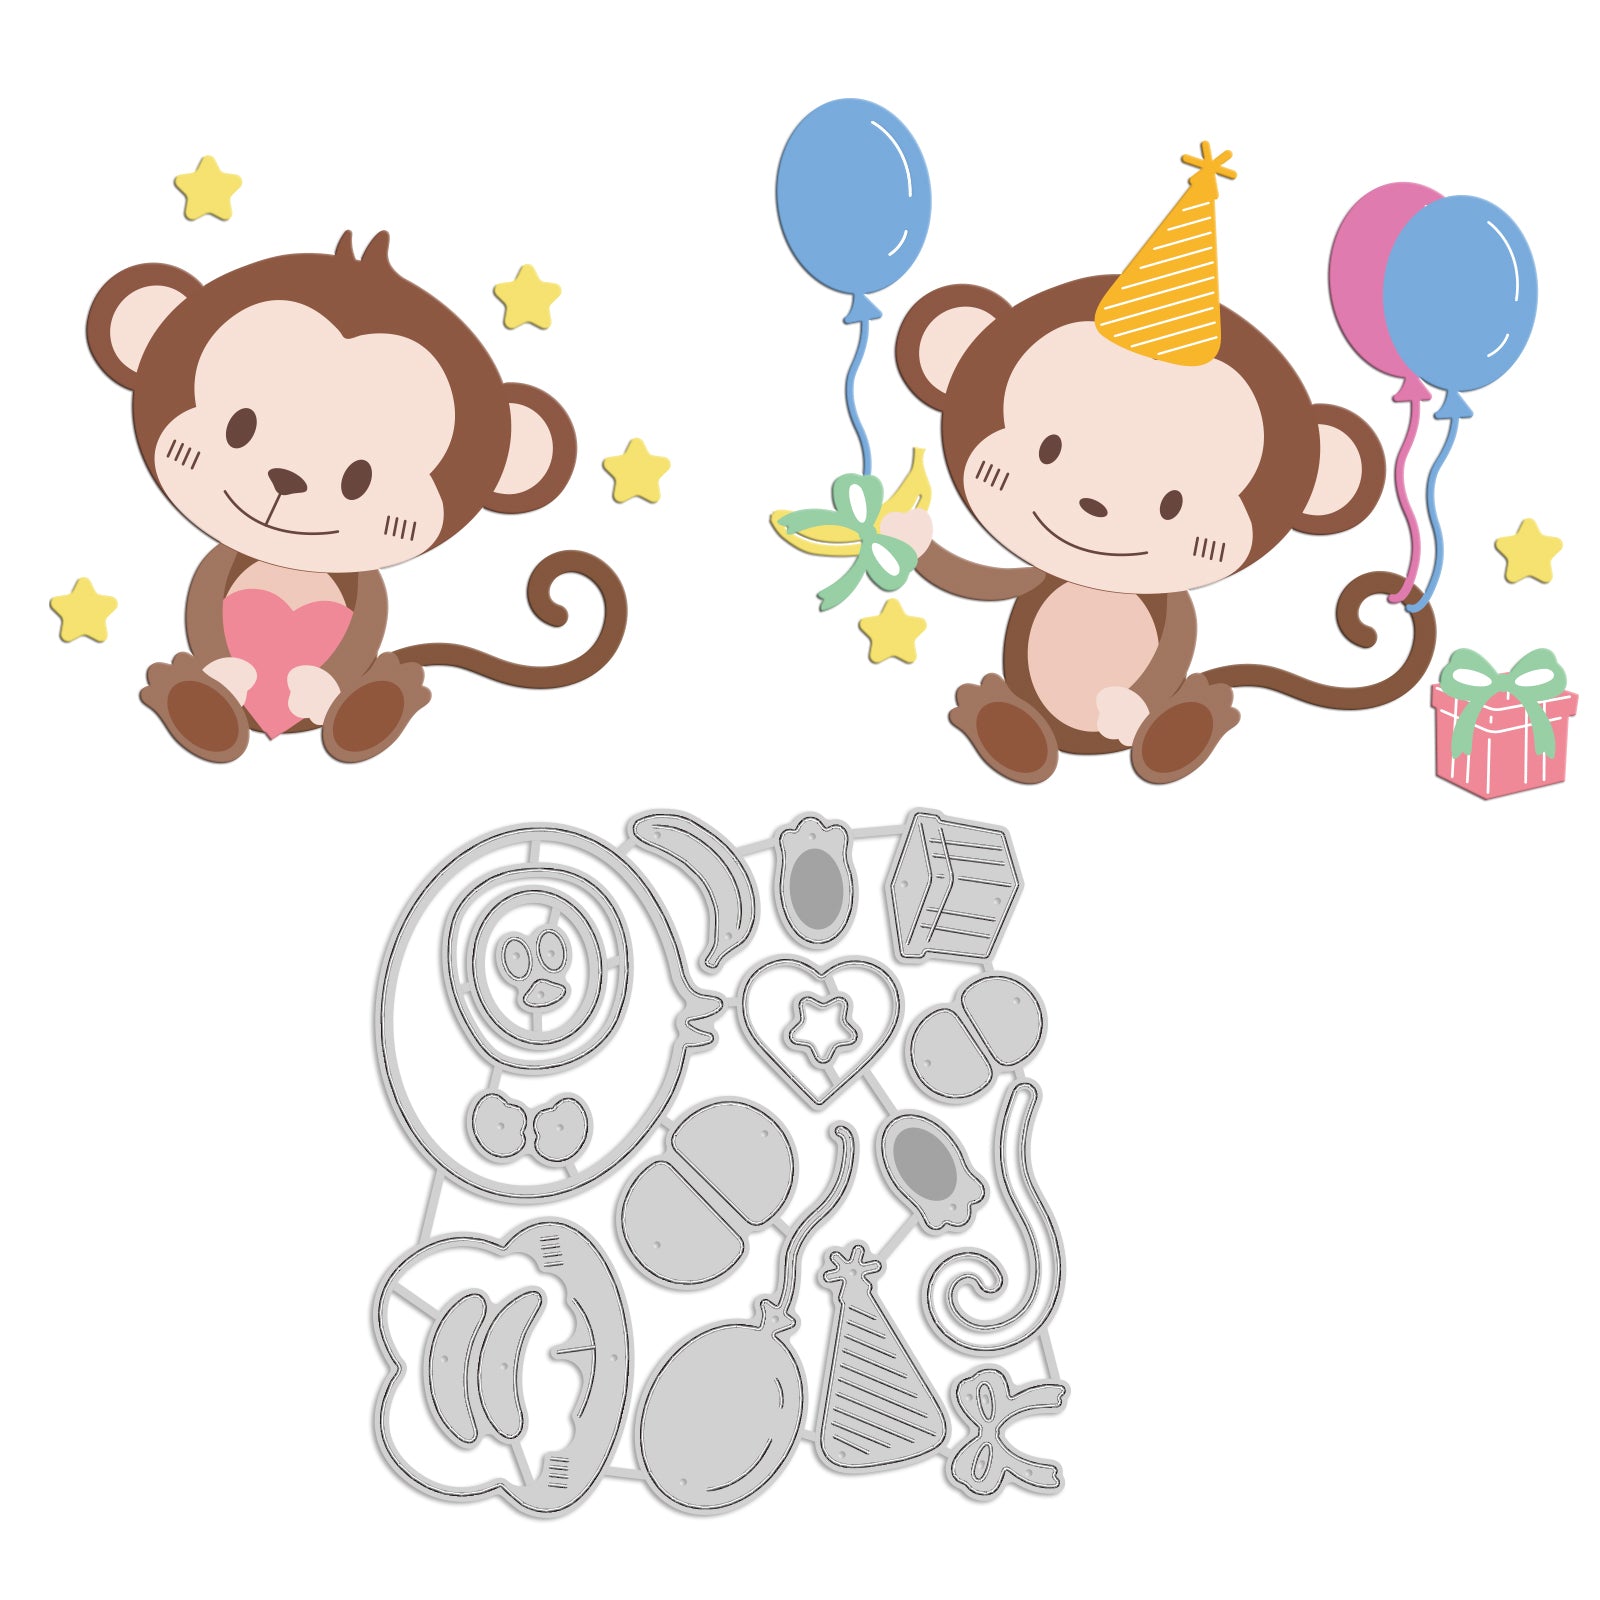 Globleland Monkey, Birthday, Party, Balloons, Hearts, Stars Carbon Steel Cutting Dies Stencils, for DIY Scrapbooking/Photo Album, Decorative Embossing DIY Paper Card